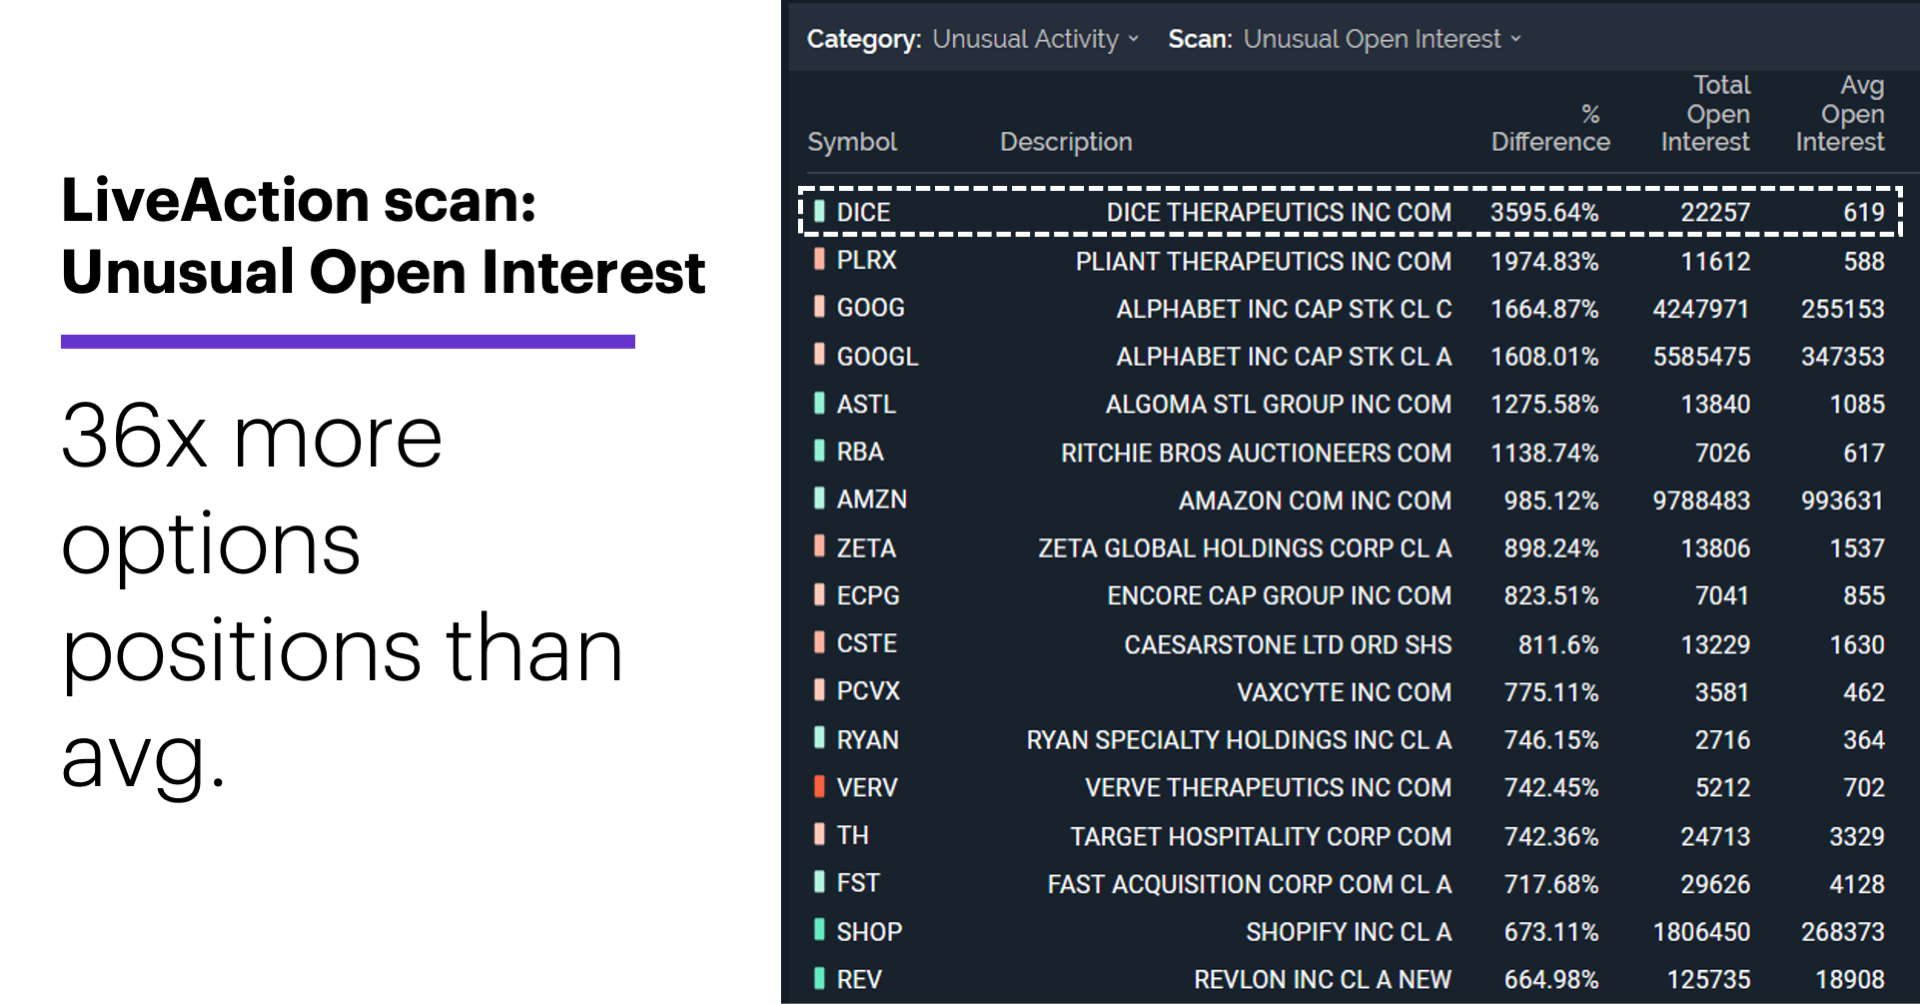 Chart 2: LiveAction scan: Unusual Open Interest. Unusual options activity. 36 times more options positions than avg.